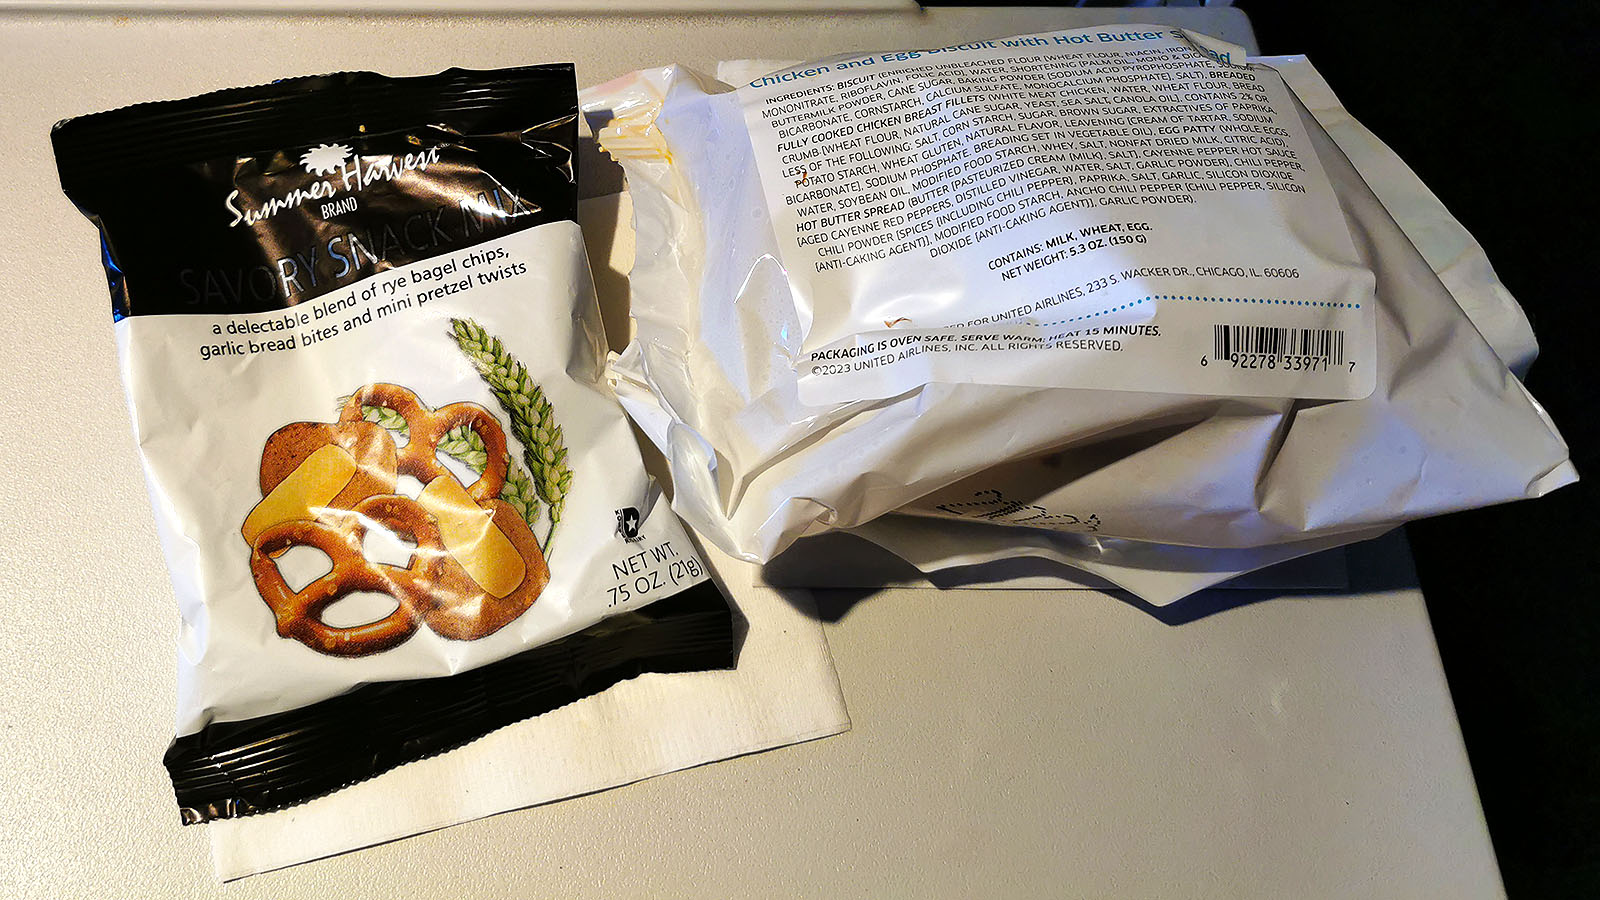 Pretzels and menu item purchased on a United Airlines Airbus A319 flight